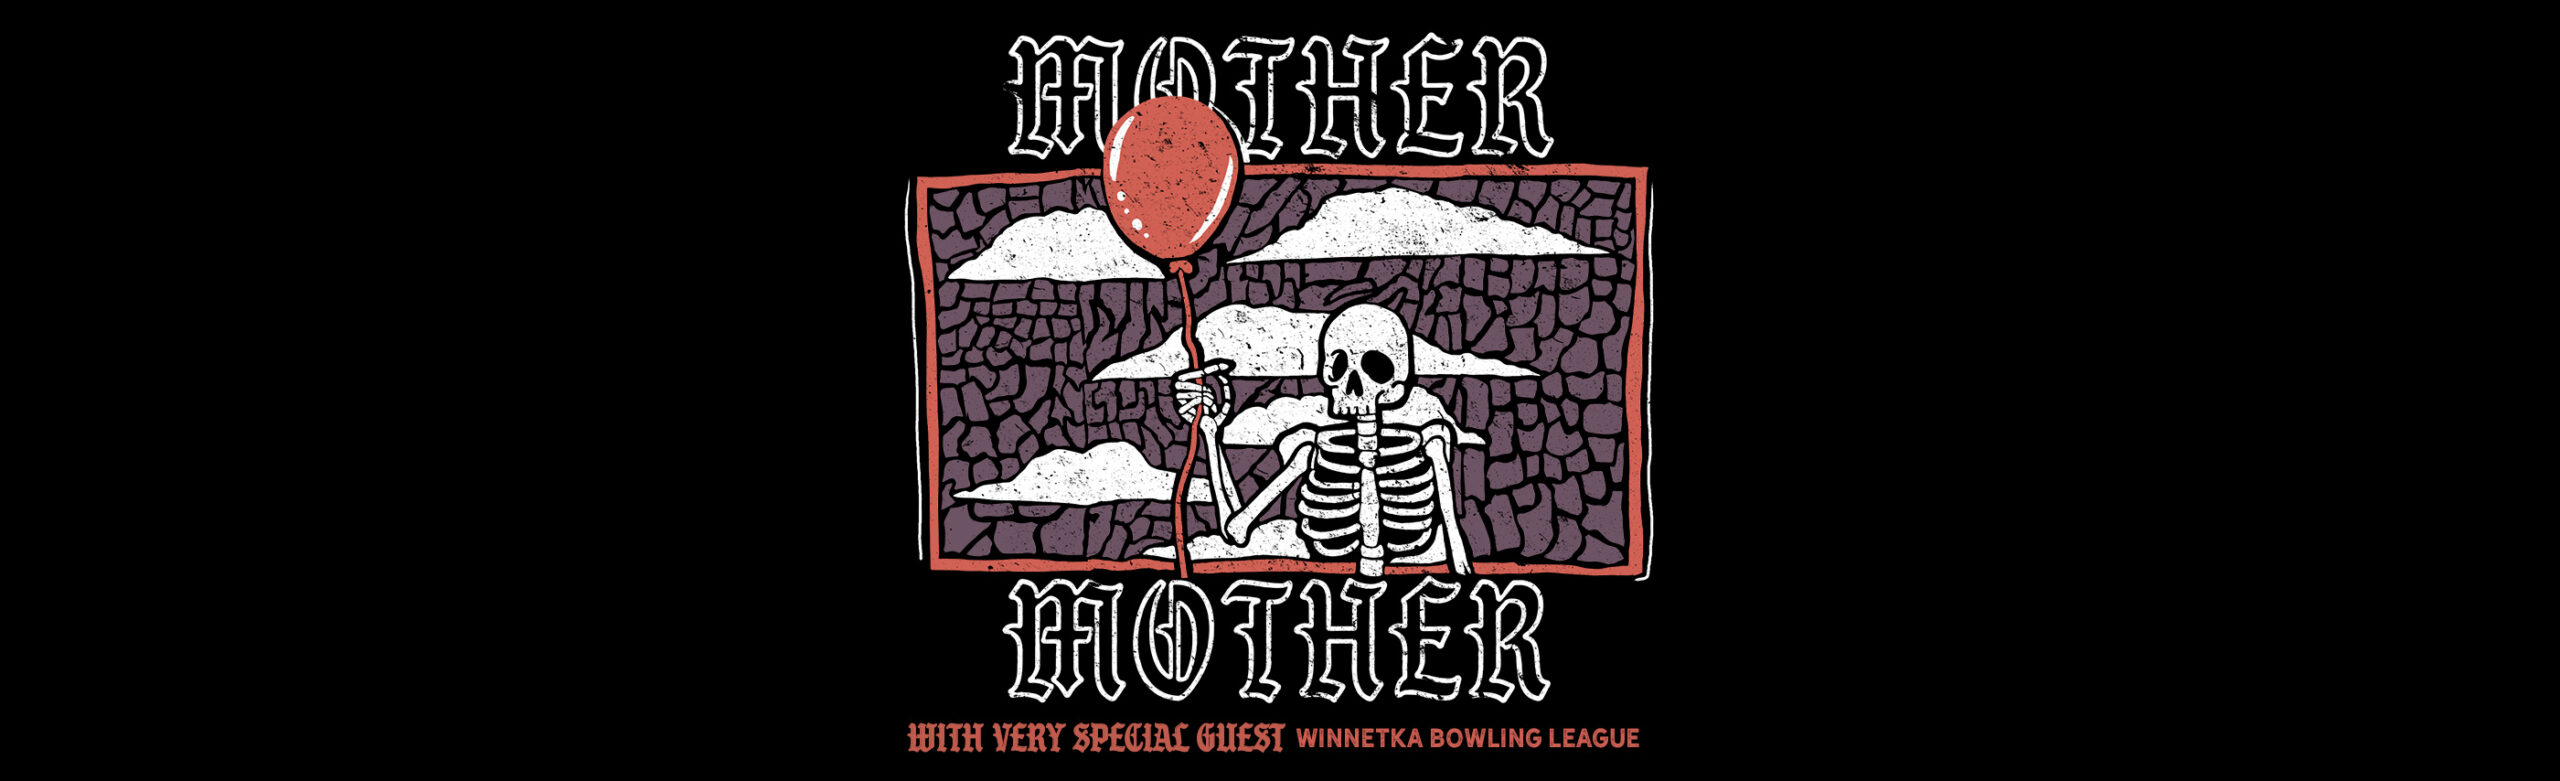 Mother Mother Announce Concert at The Wilma Image